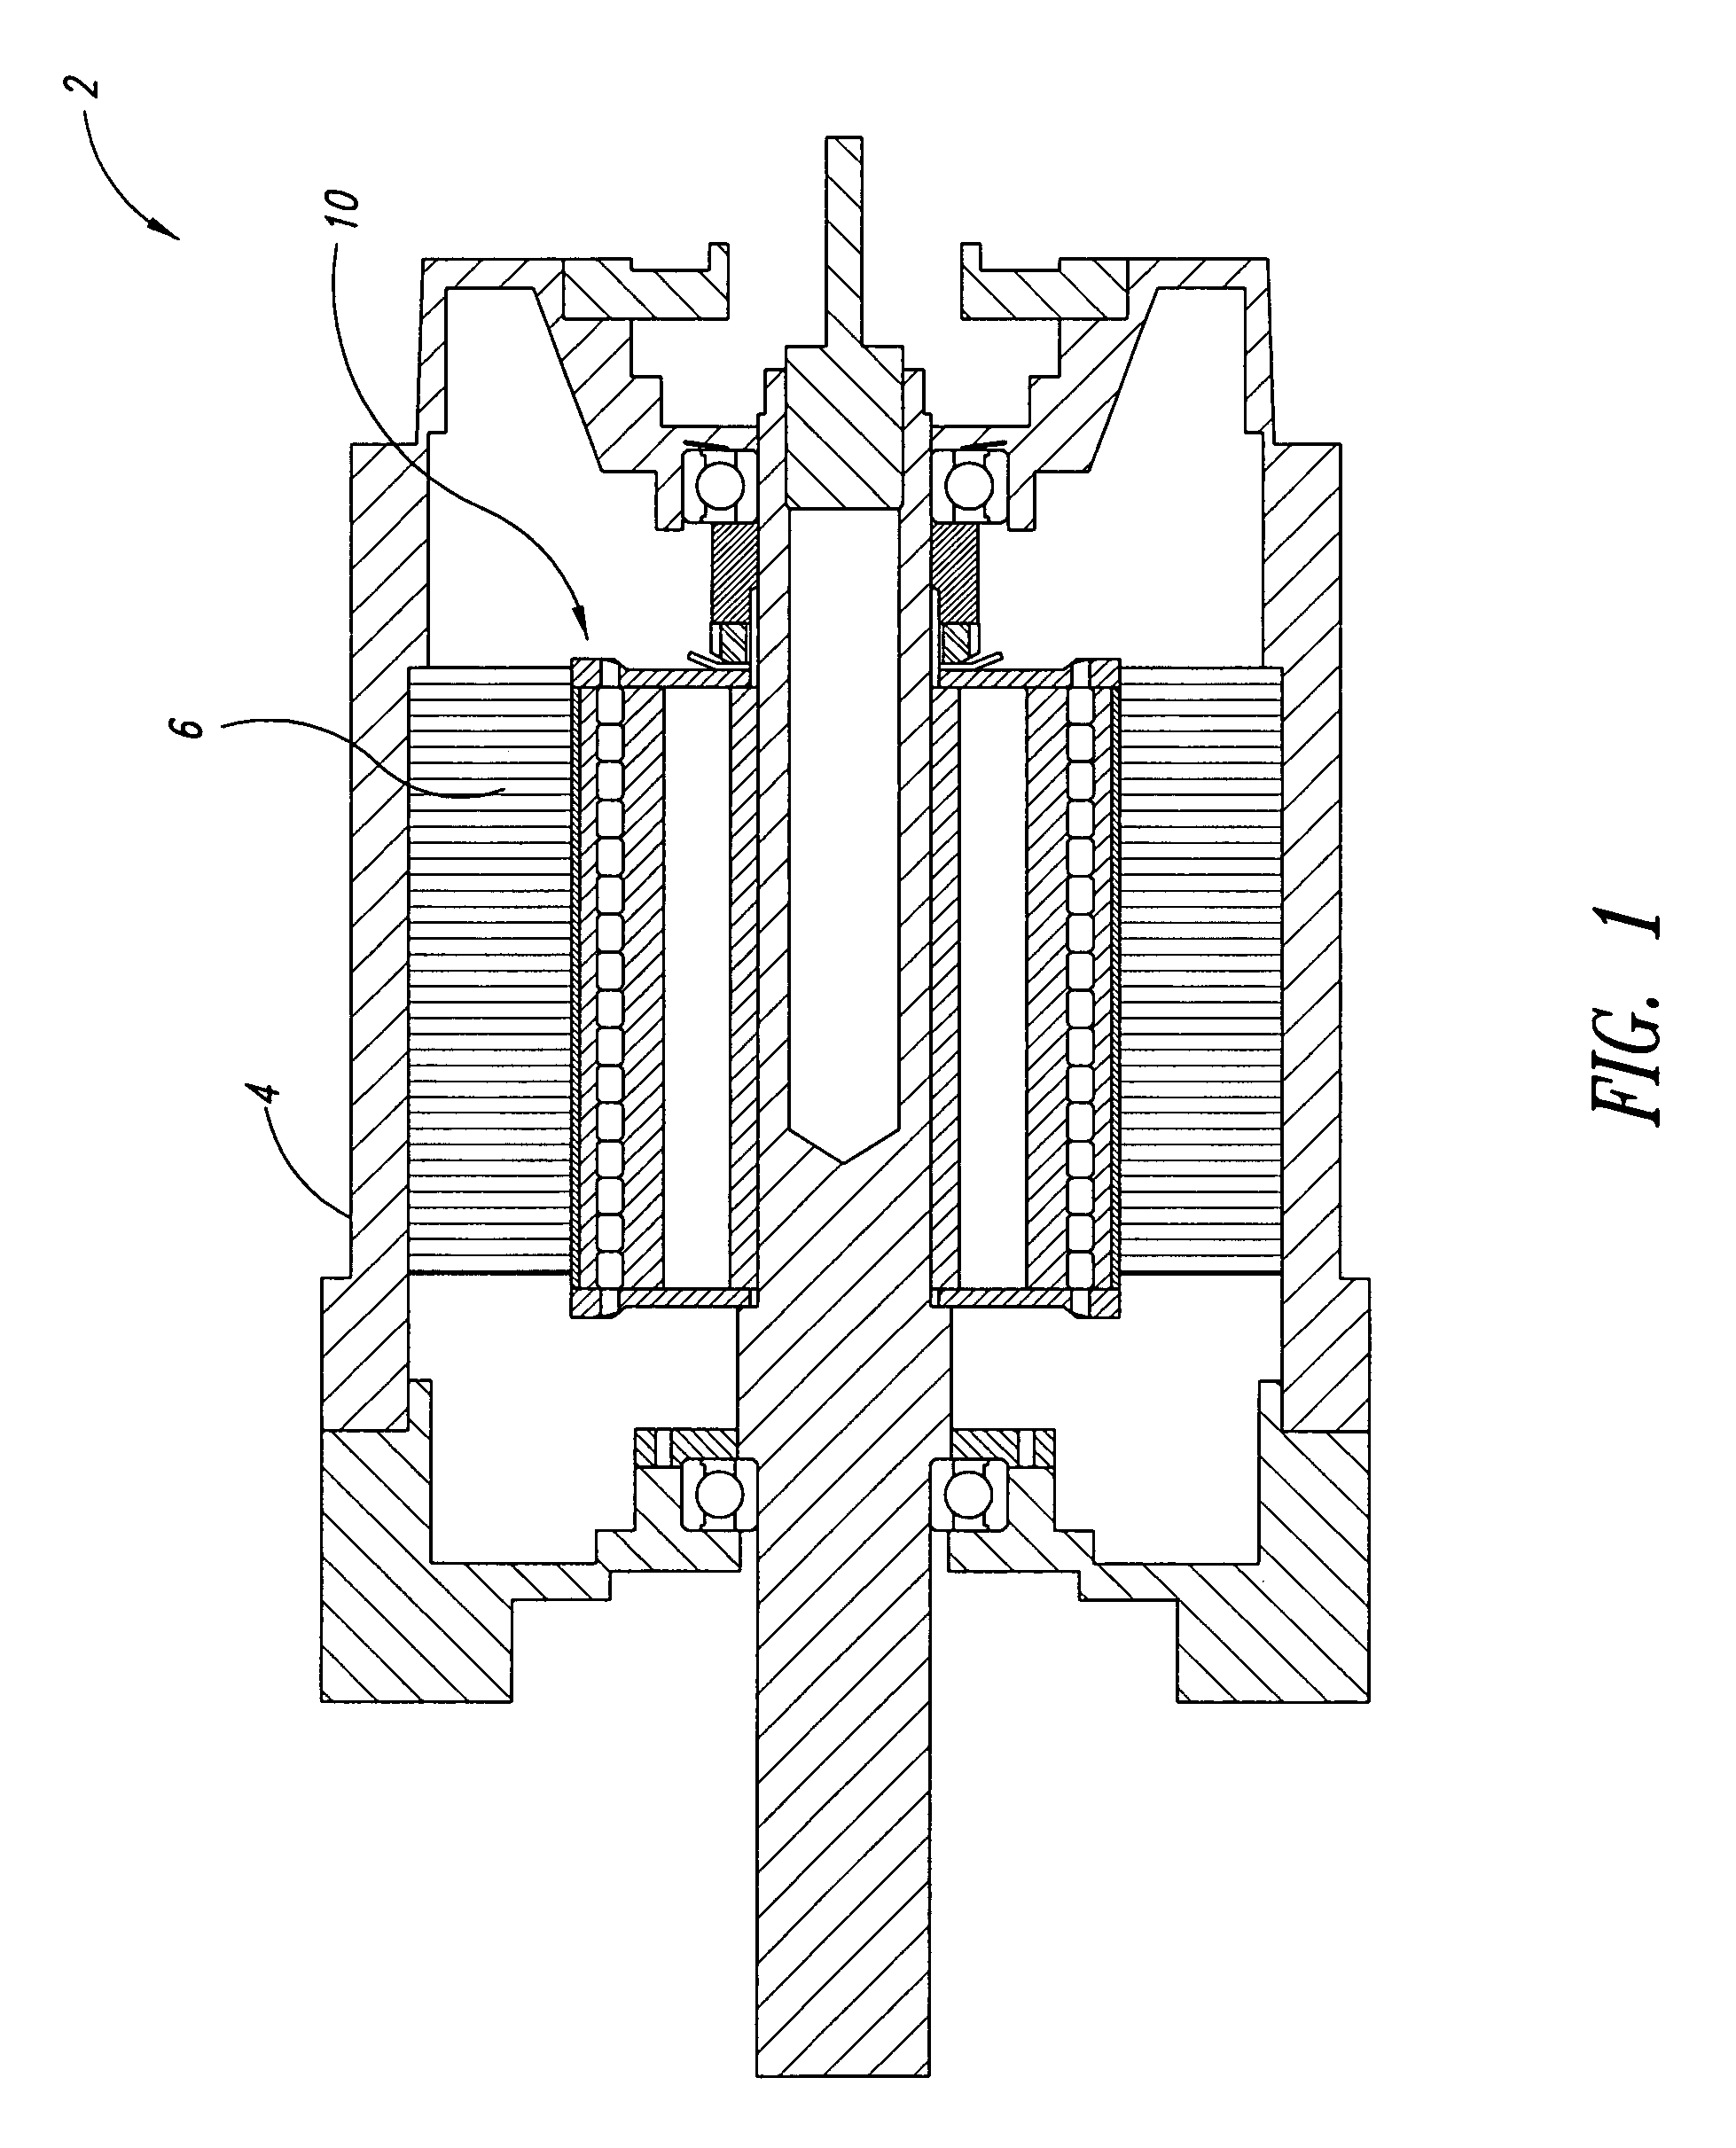 Rotor assembly for a permanent magnet power electric machine